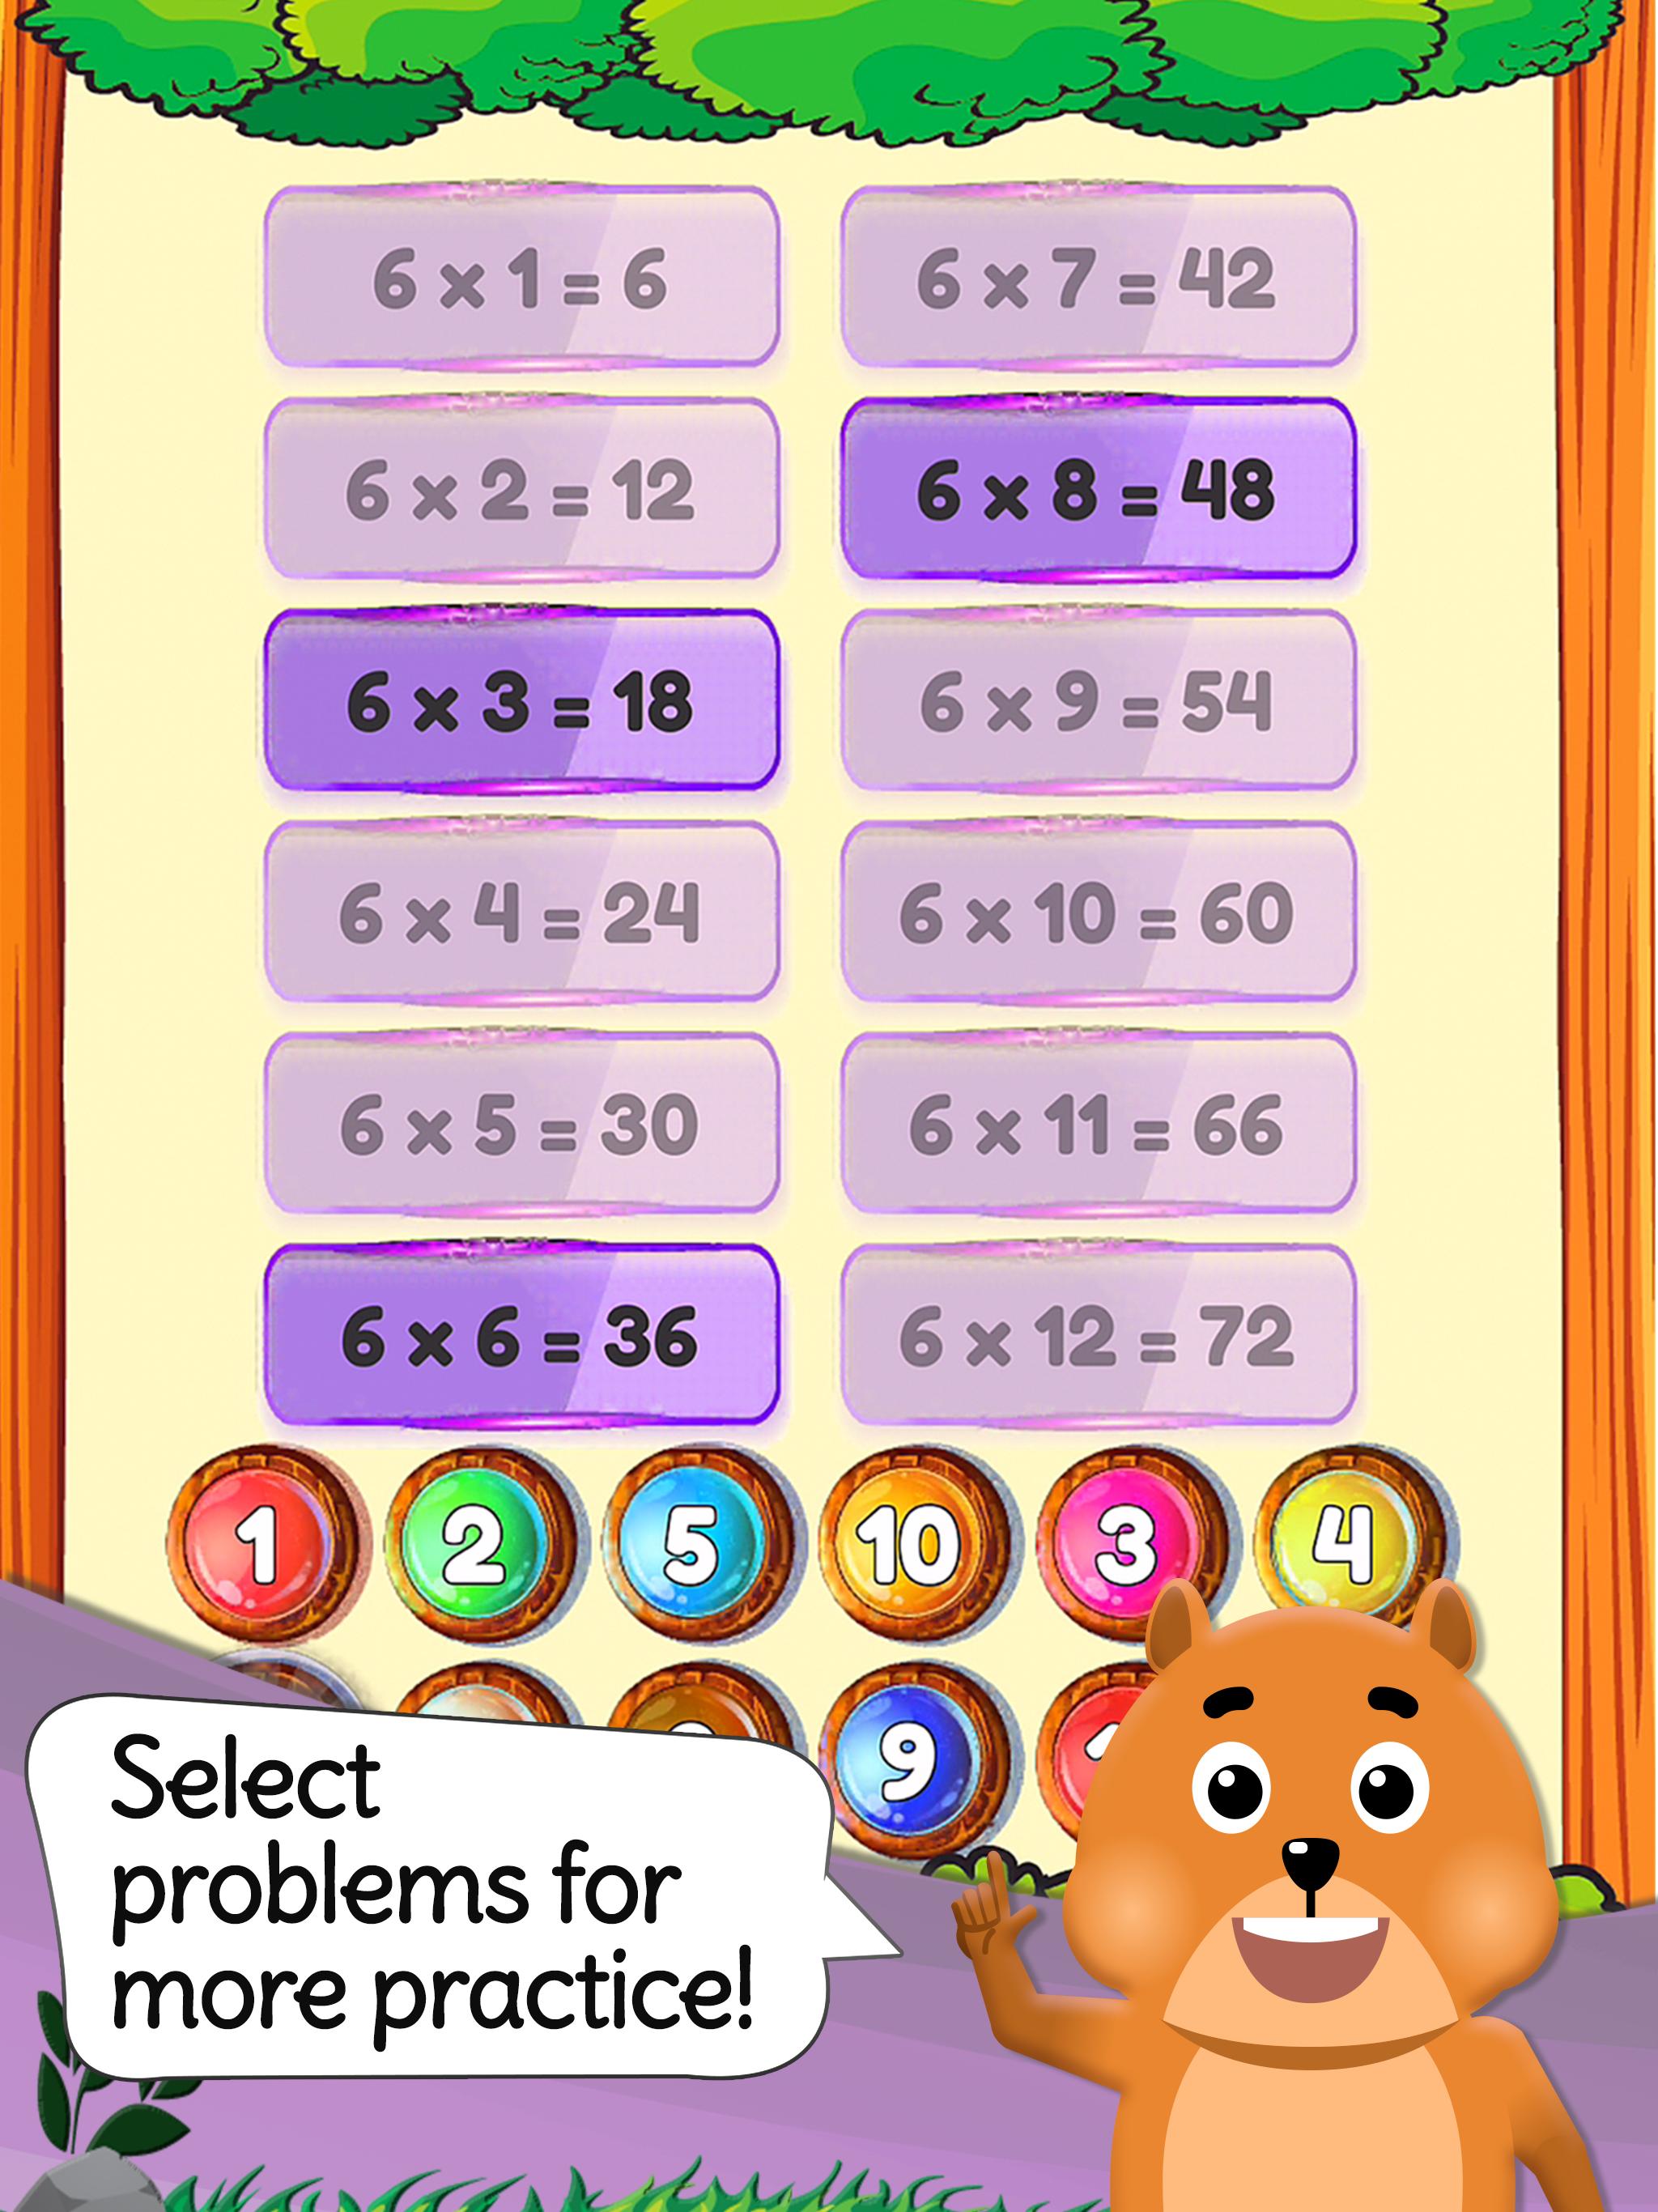 Times Tables & Friends: Free Multiplication Games 2.3.77 Screenshot 15